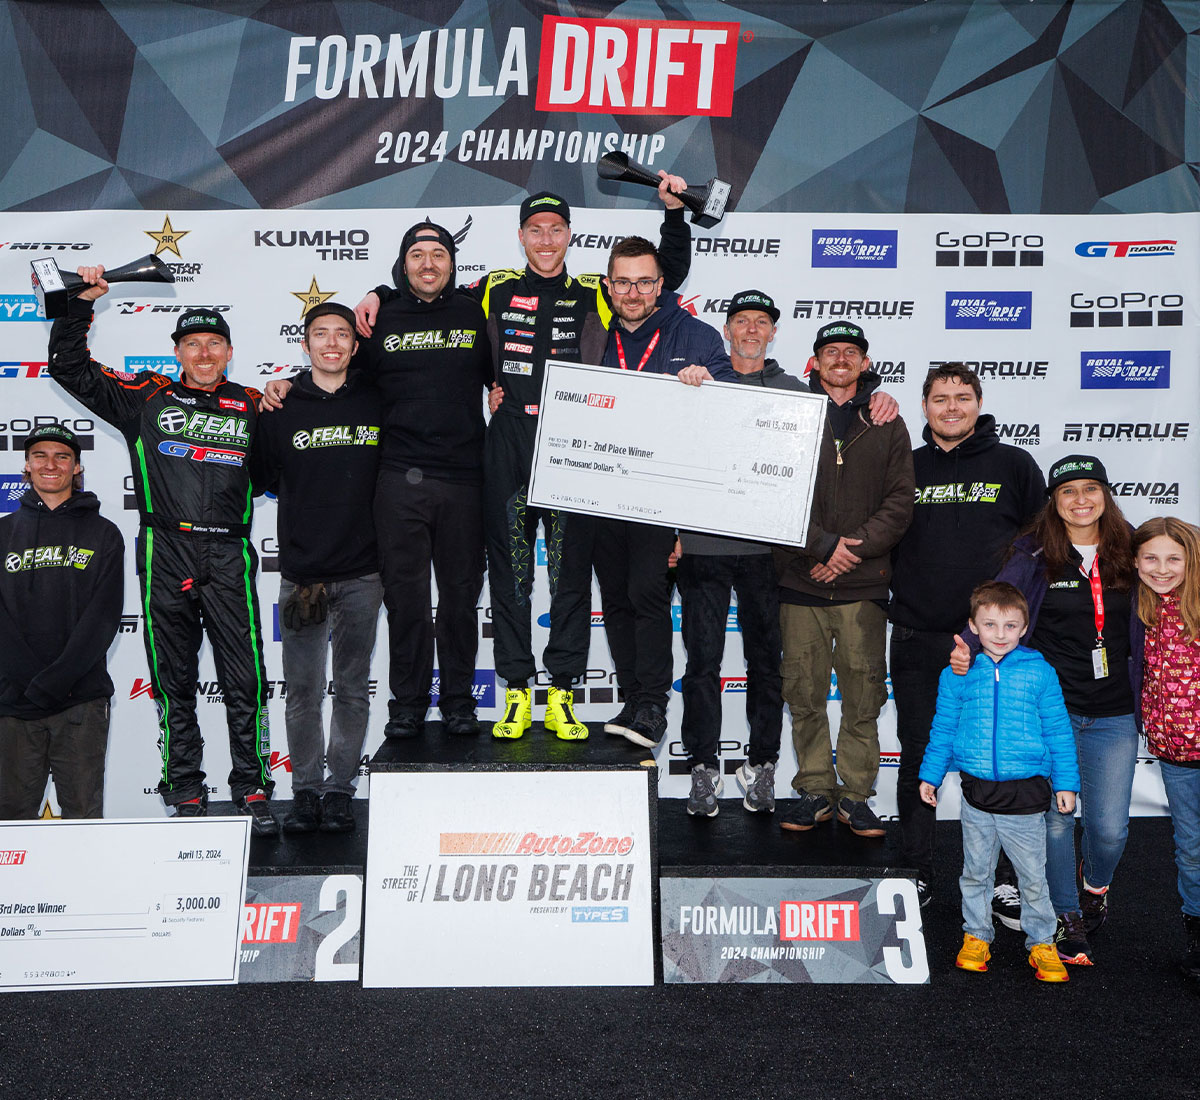 Feal Race Team finishes P2 and P3 at the 2024 Formula DRIFT PRO Championship opening round at the Streets of Long Beach